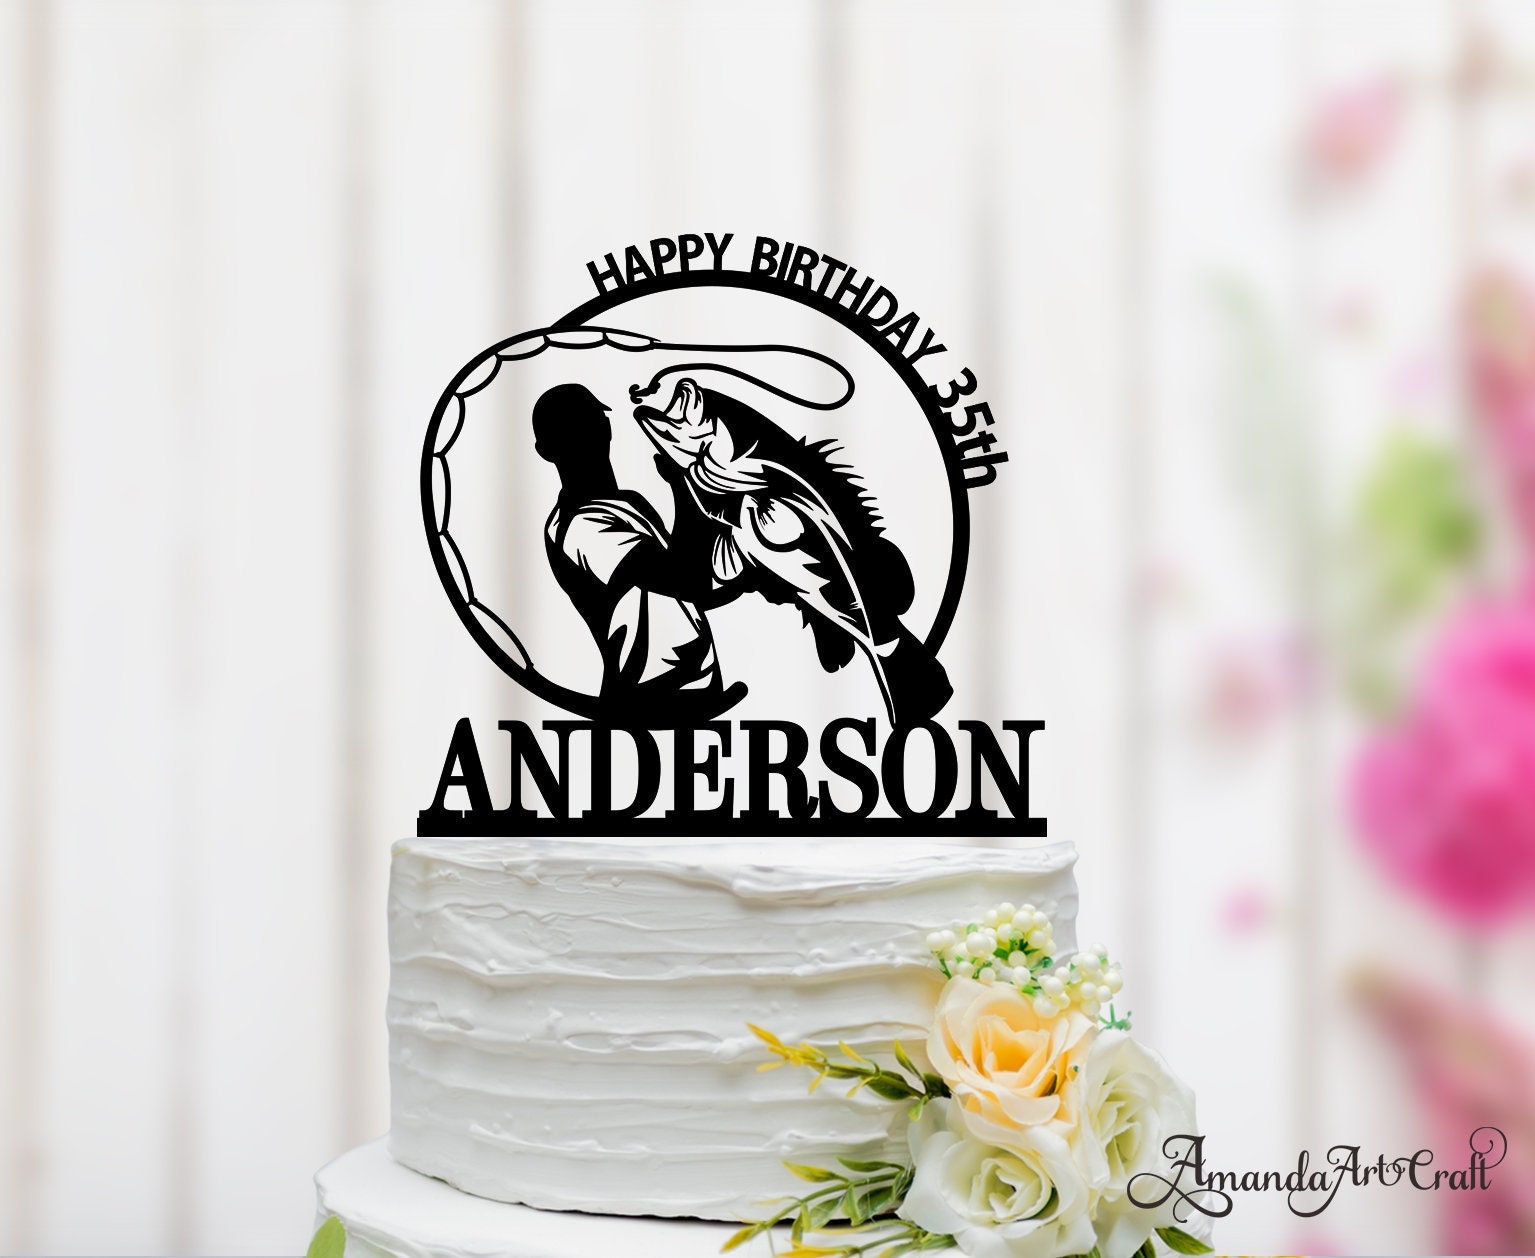 Fishing Cake Topper Gone fishing Cake with Bass Reed Happy Birthday Sign